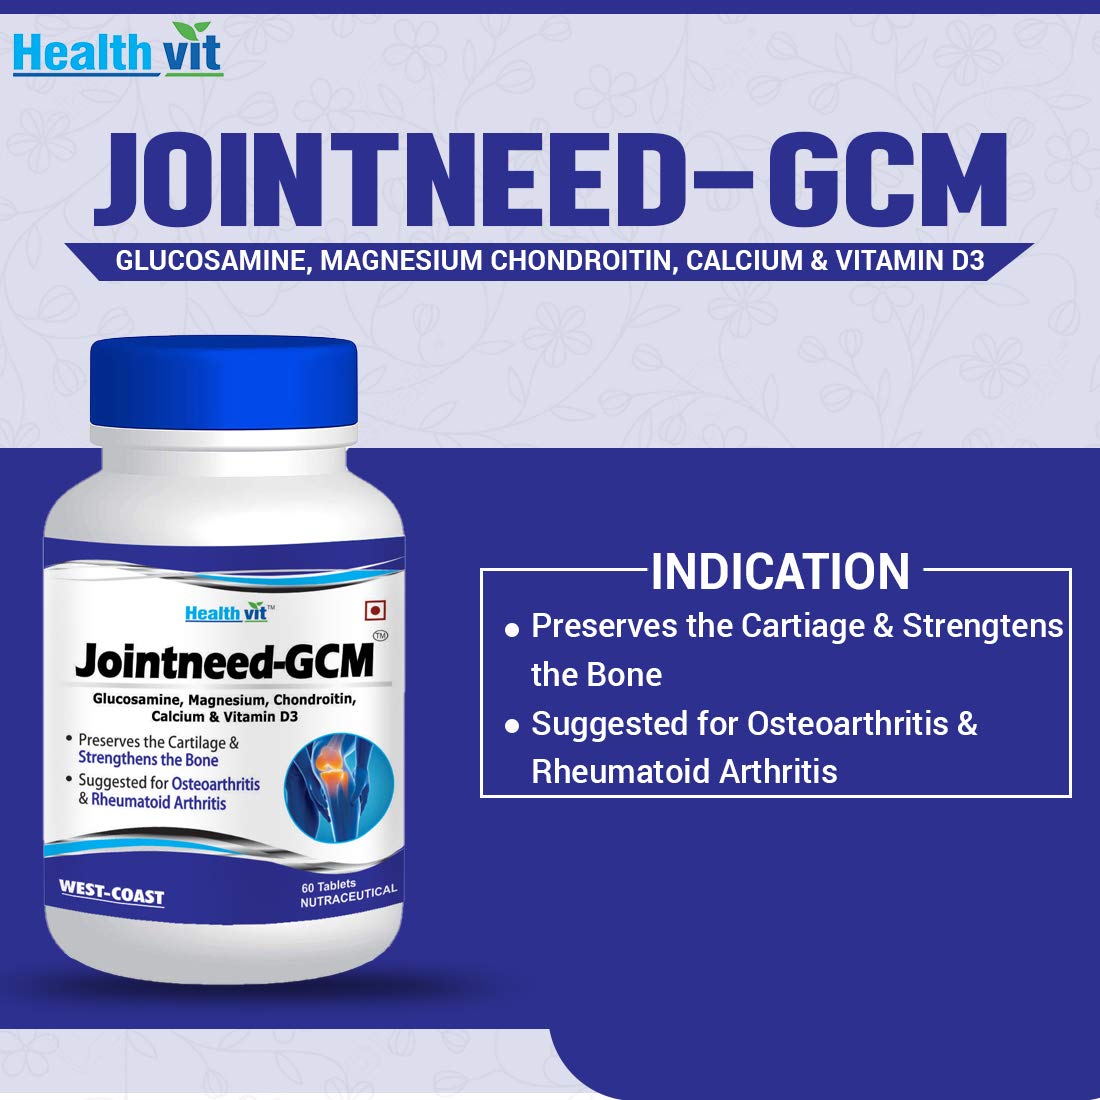 Healthvit Jointneed-GCM with Glucosamine, Magnesium, Chondroitin, Calcium & Vitamin D Ideal for Bone, Muscle Health & Joint Support of Men & Women - 60 Tablets